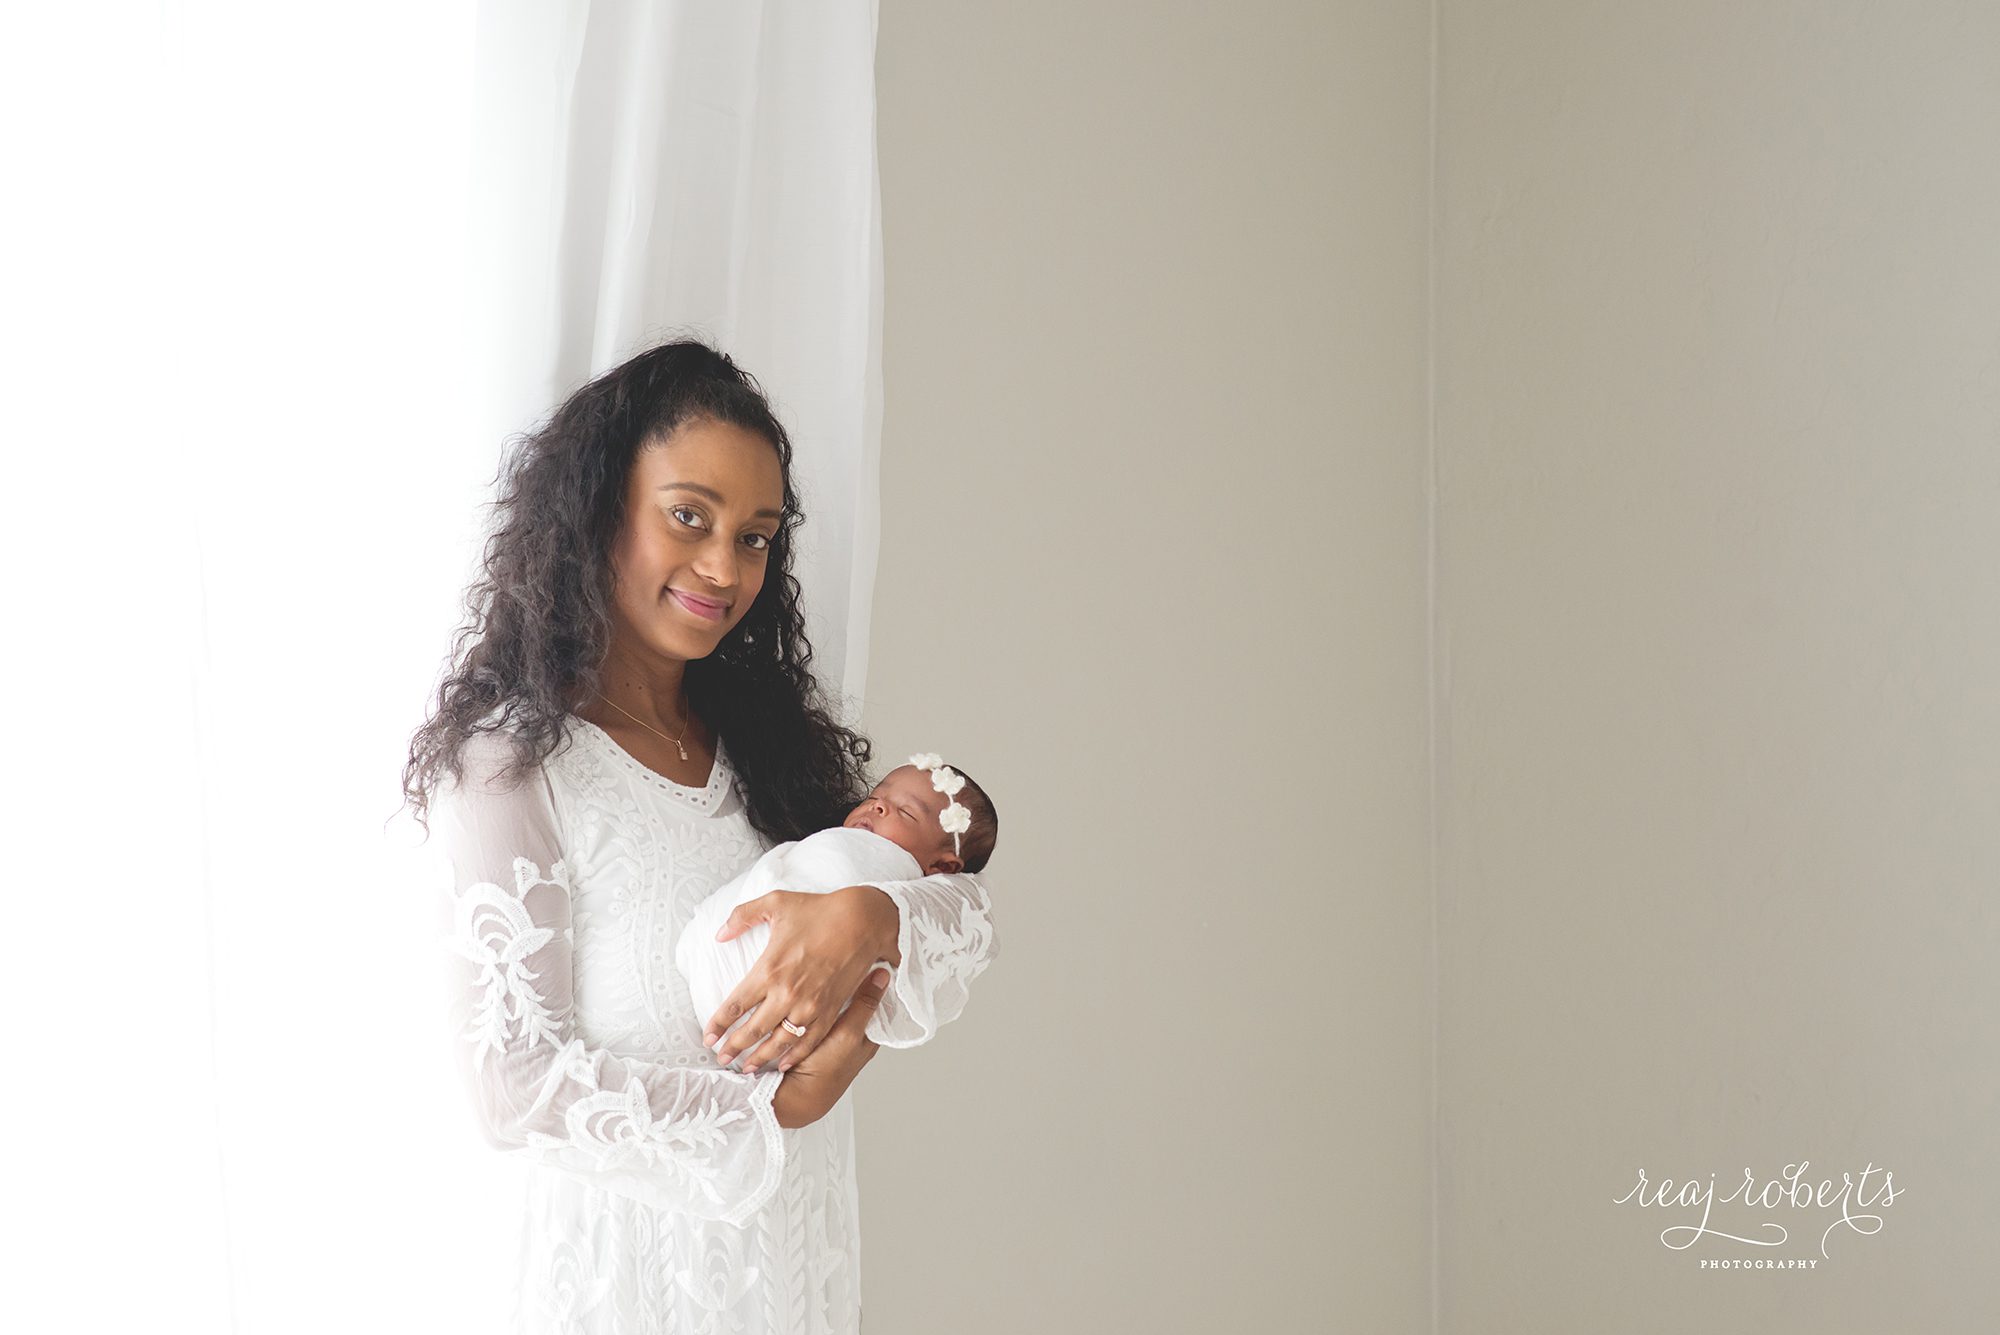 Mothers of Multiples | Reaj Roberts Photography